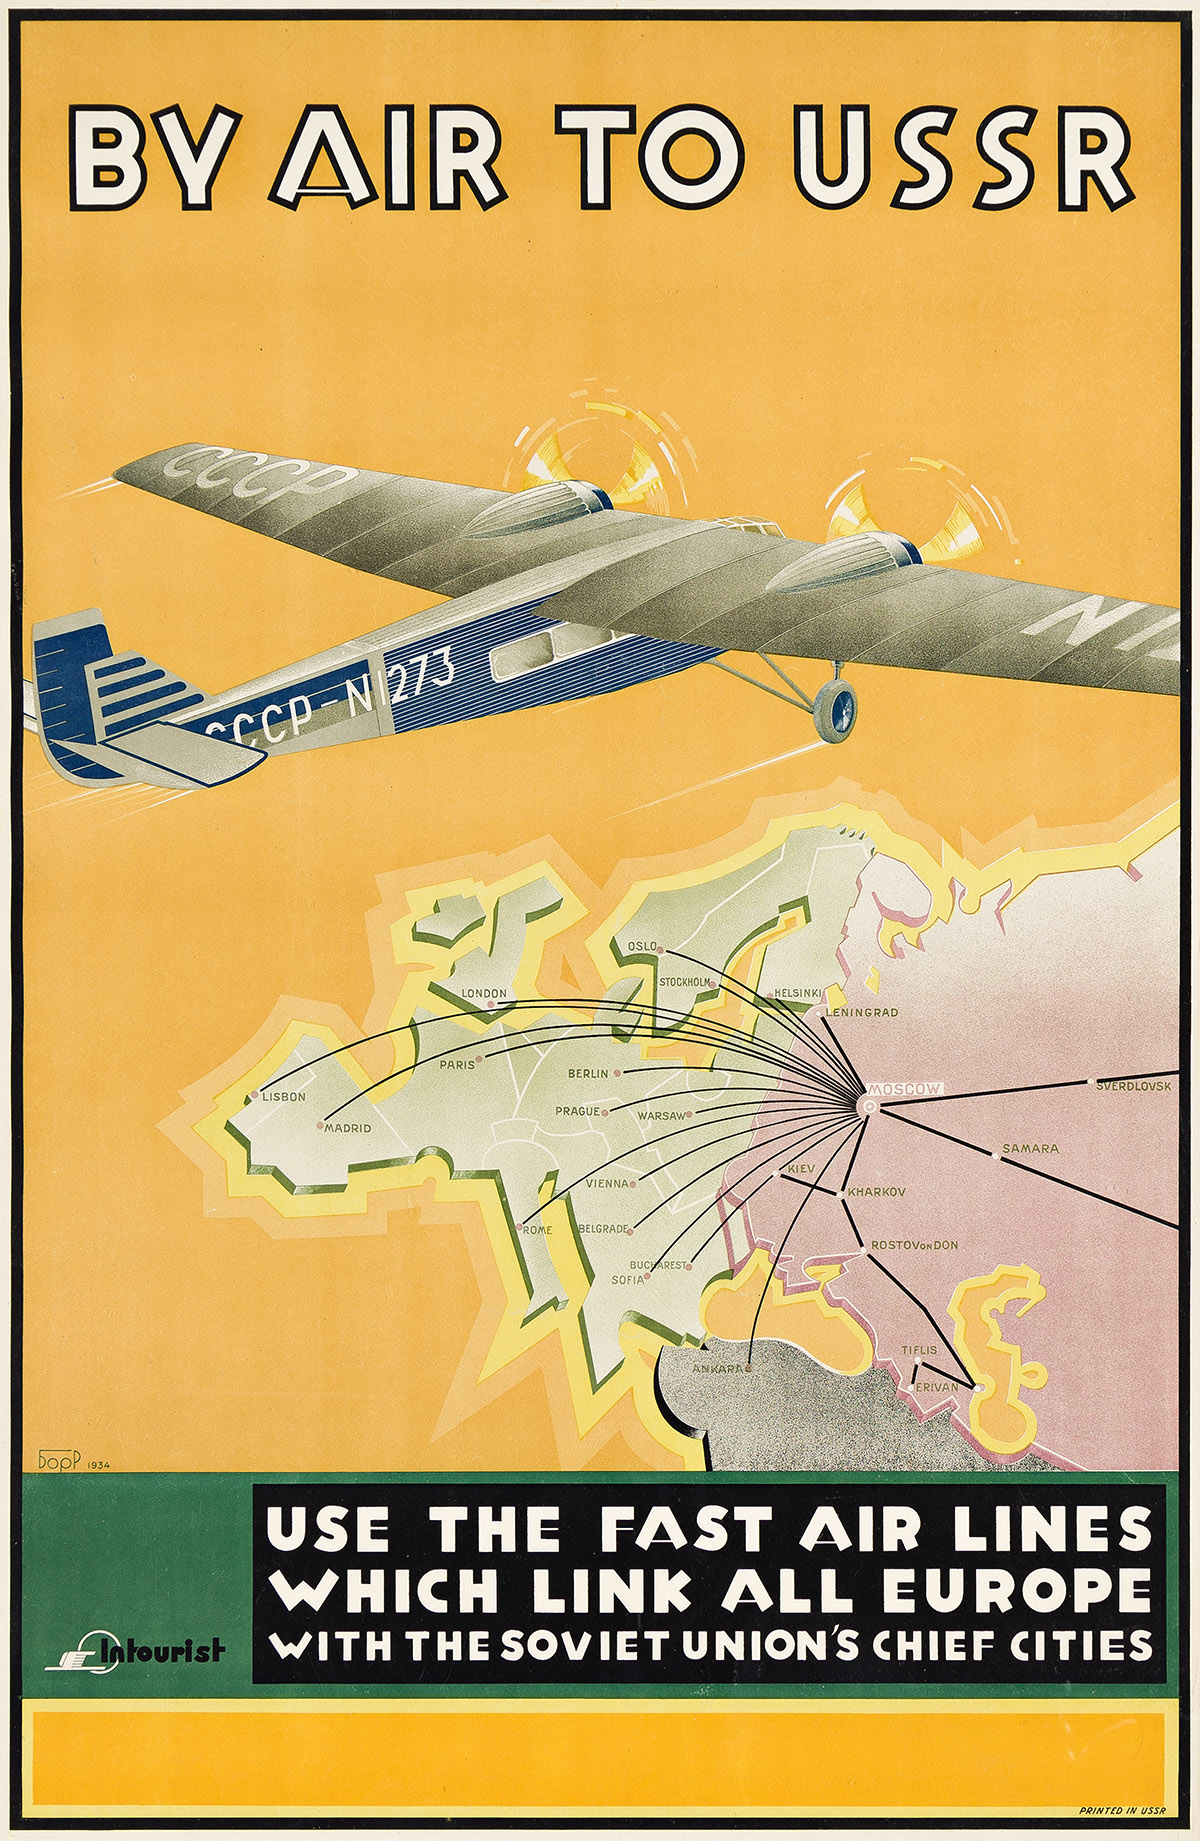 KONSTANTIN BOR RAMENSKY (1900-1942).  BY AIR TO USSR / USE THE FAST AIR LINES. 1934. 36¼x23¾ inches, 92x60¼ cm. Intourist.